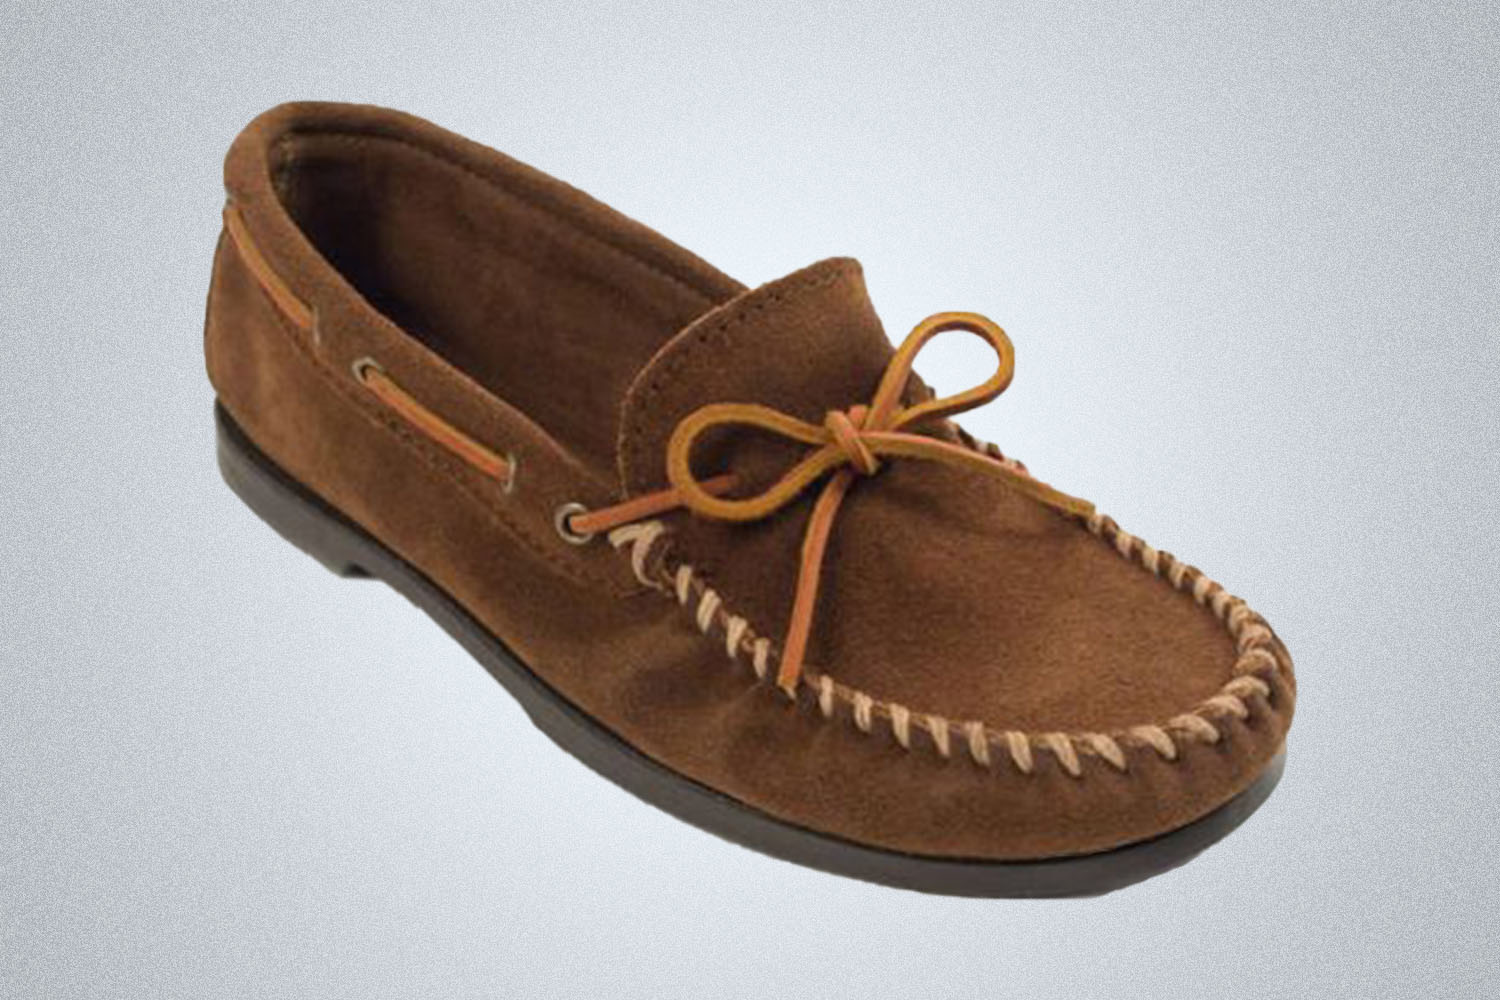 a suede brown Minnetonka moccasin on a grey background